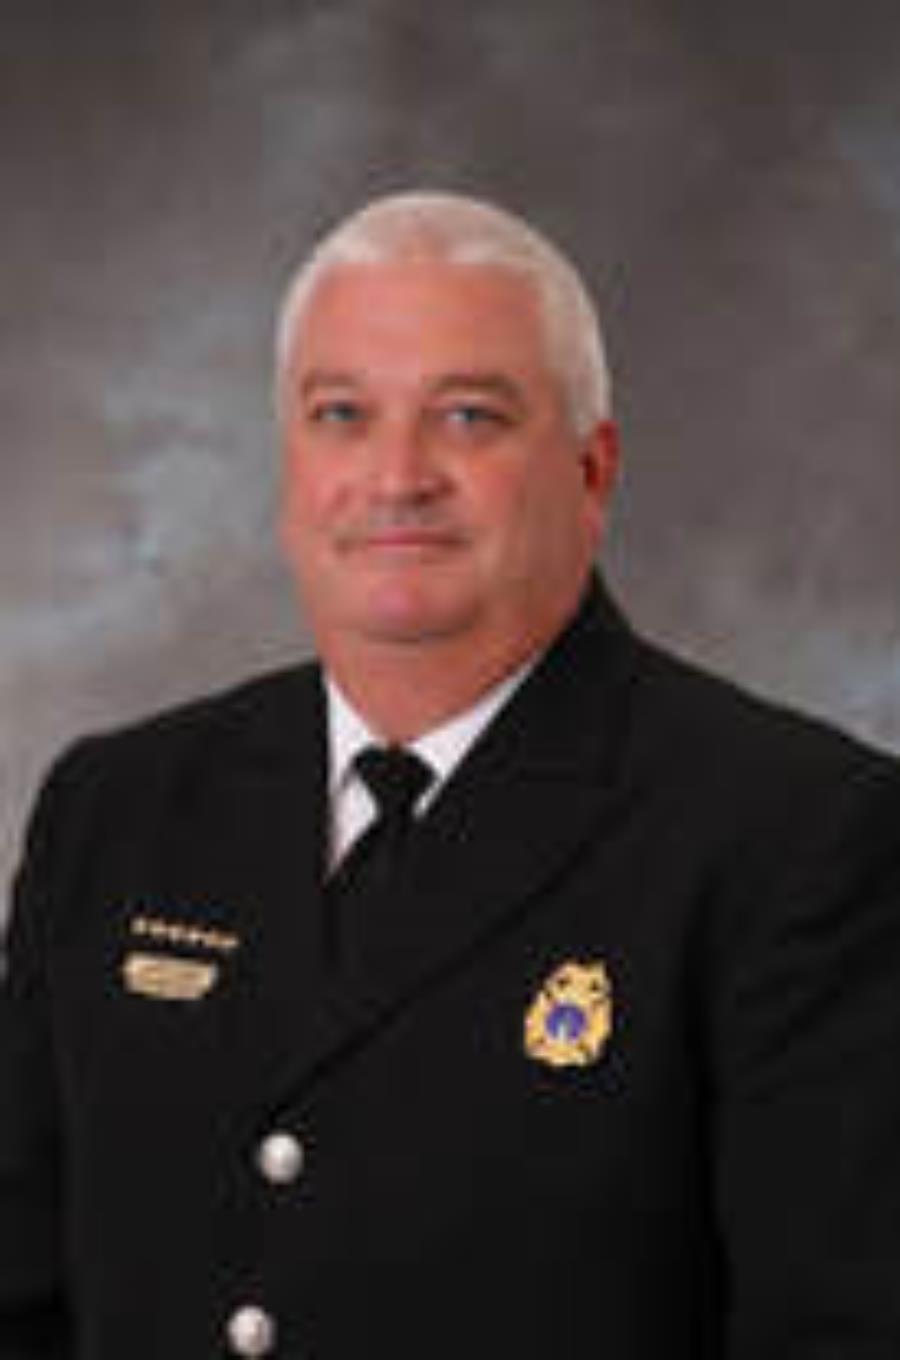 A full-time, 40-hour, Fire Inspector position was recreated and Captain Jamie Bunn was named Fire Inspector.